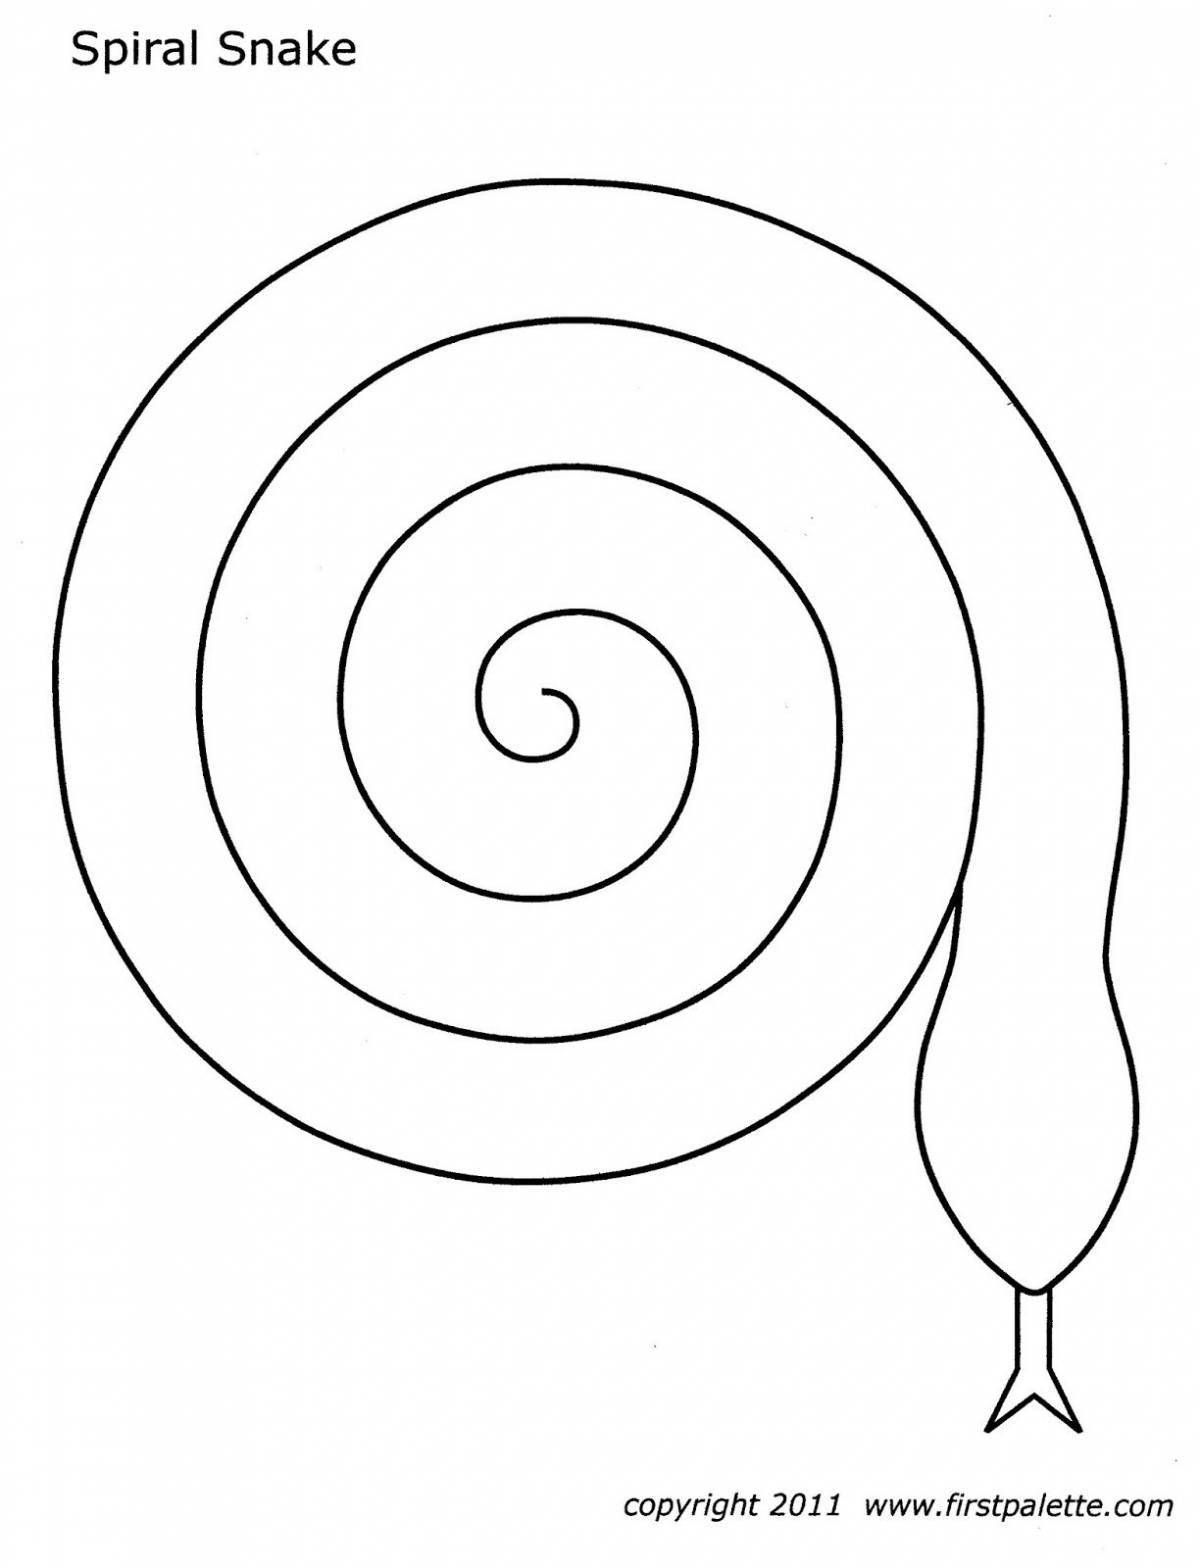 Sparkling coloring pages spiral prints